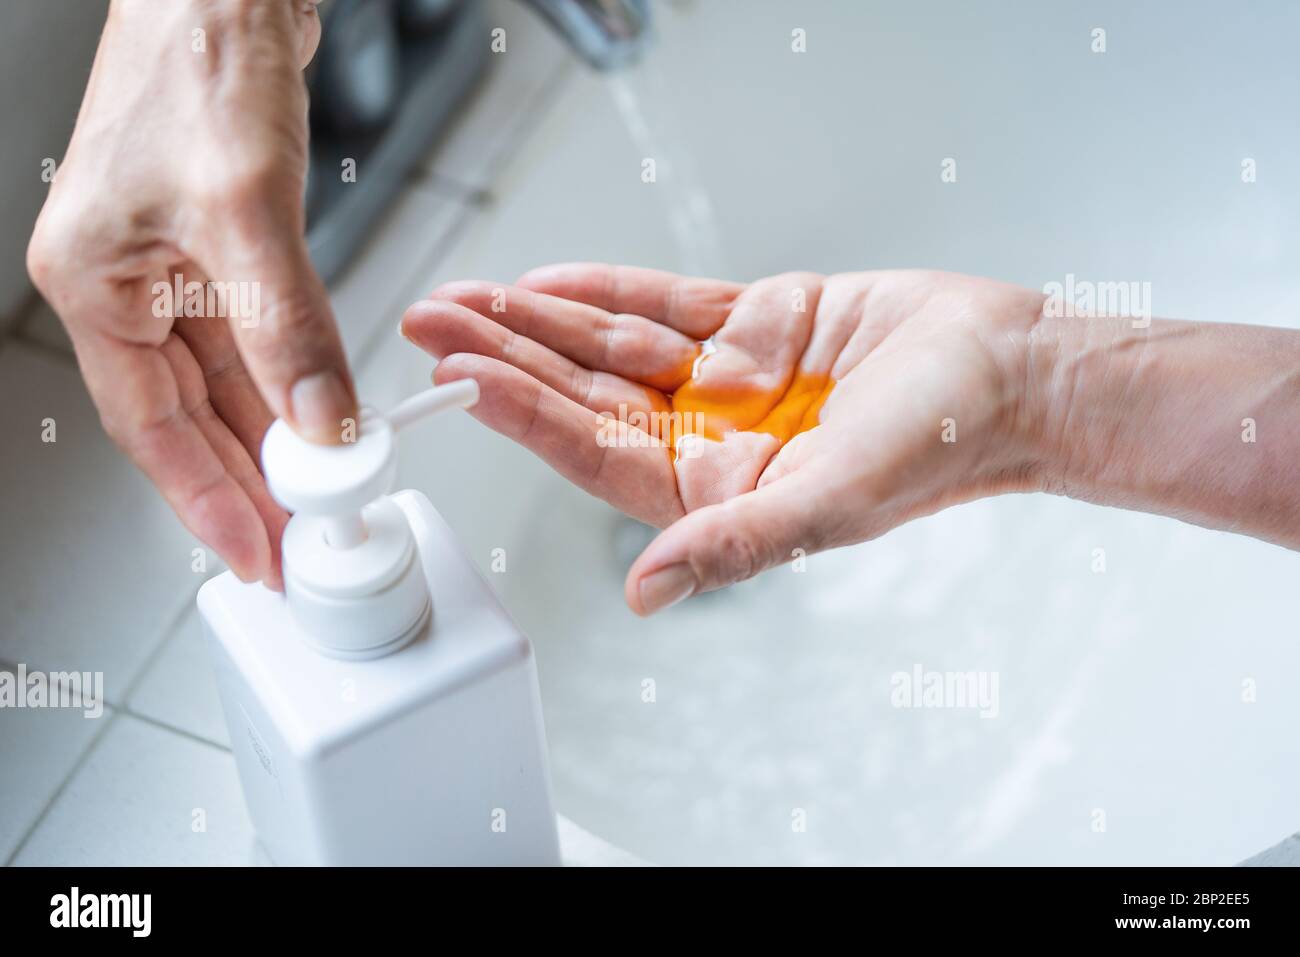 Woman washing her hands. Stock Photo